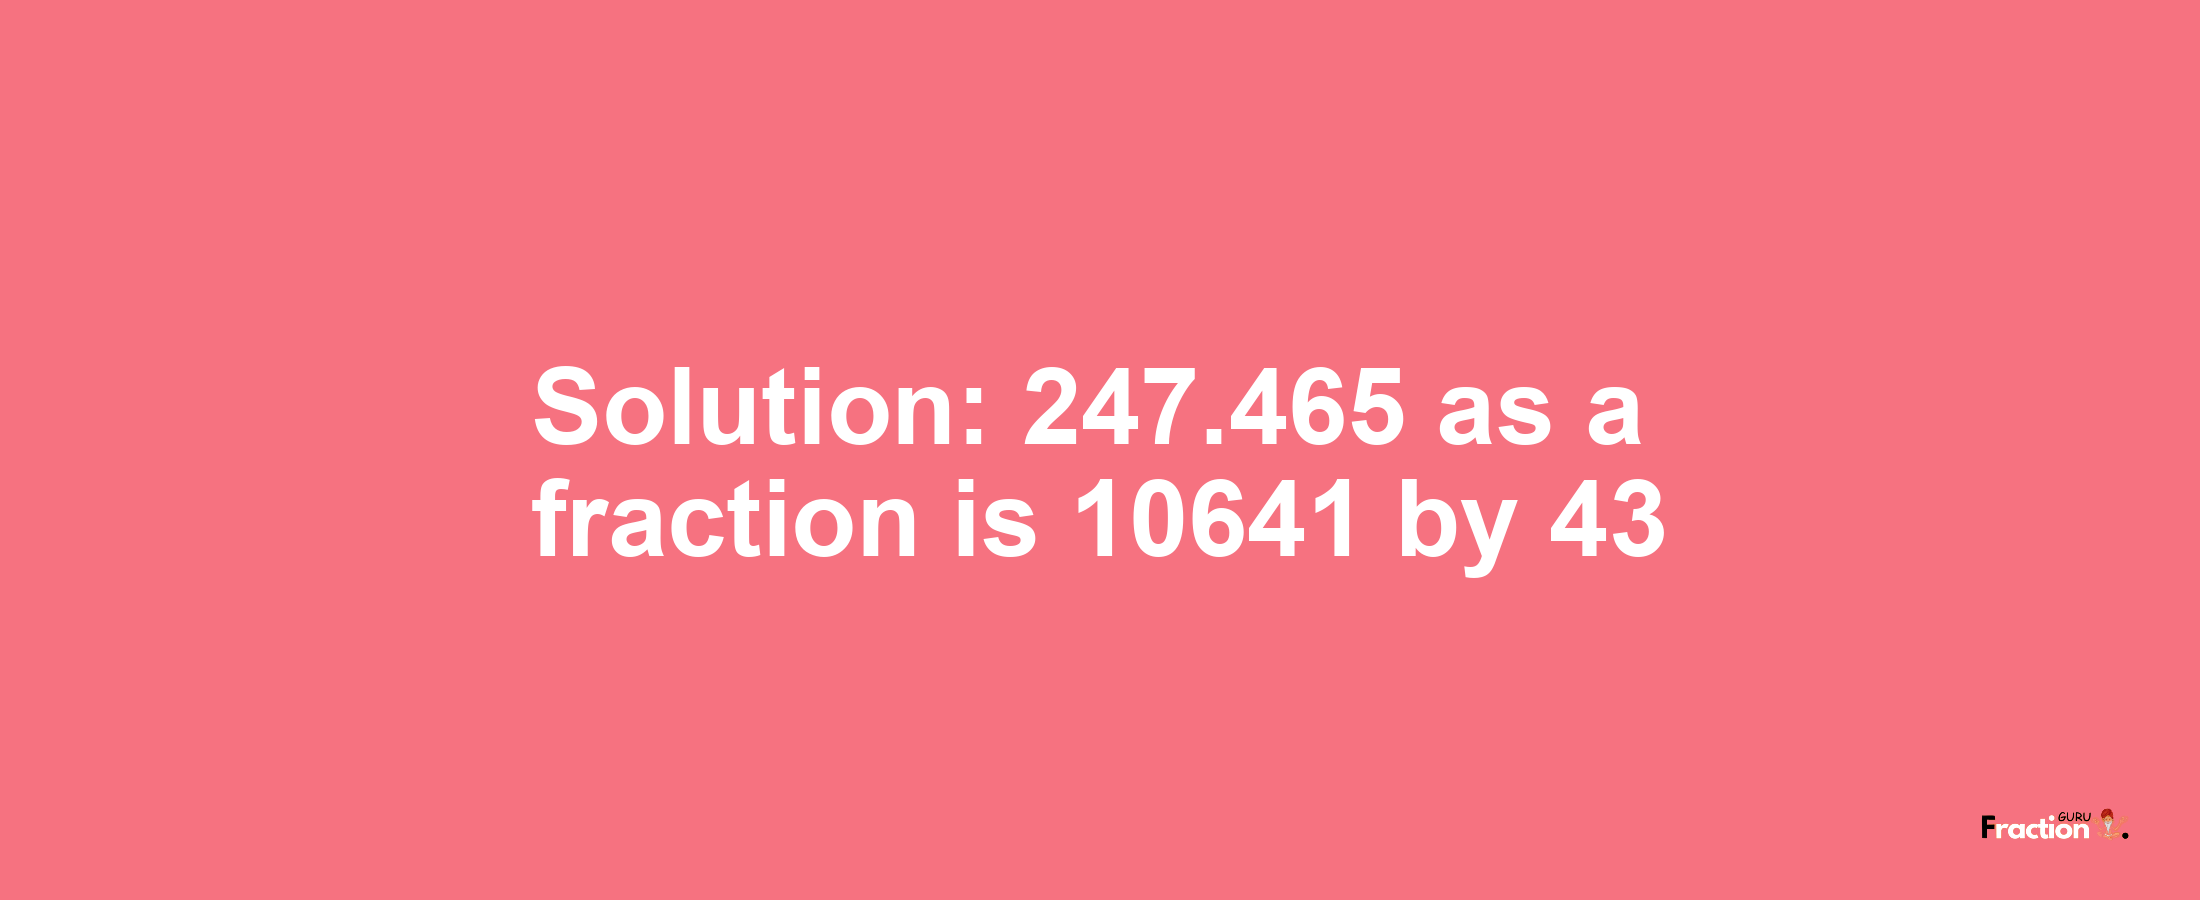 Solution:247.465 as a fraction is 10641/43